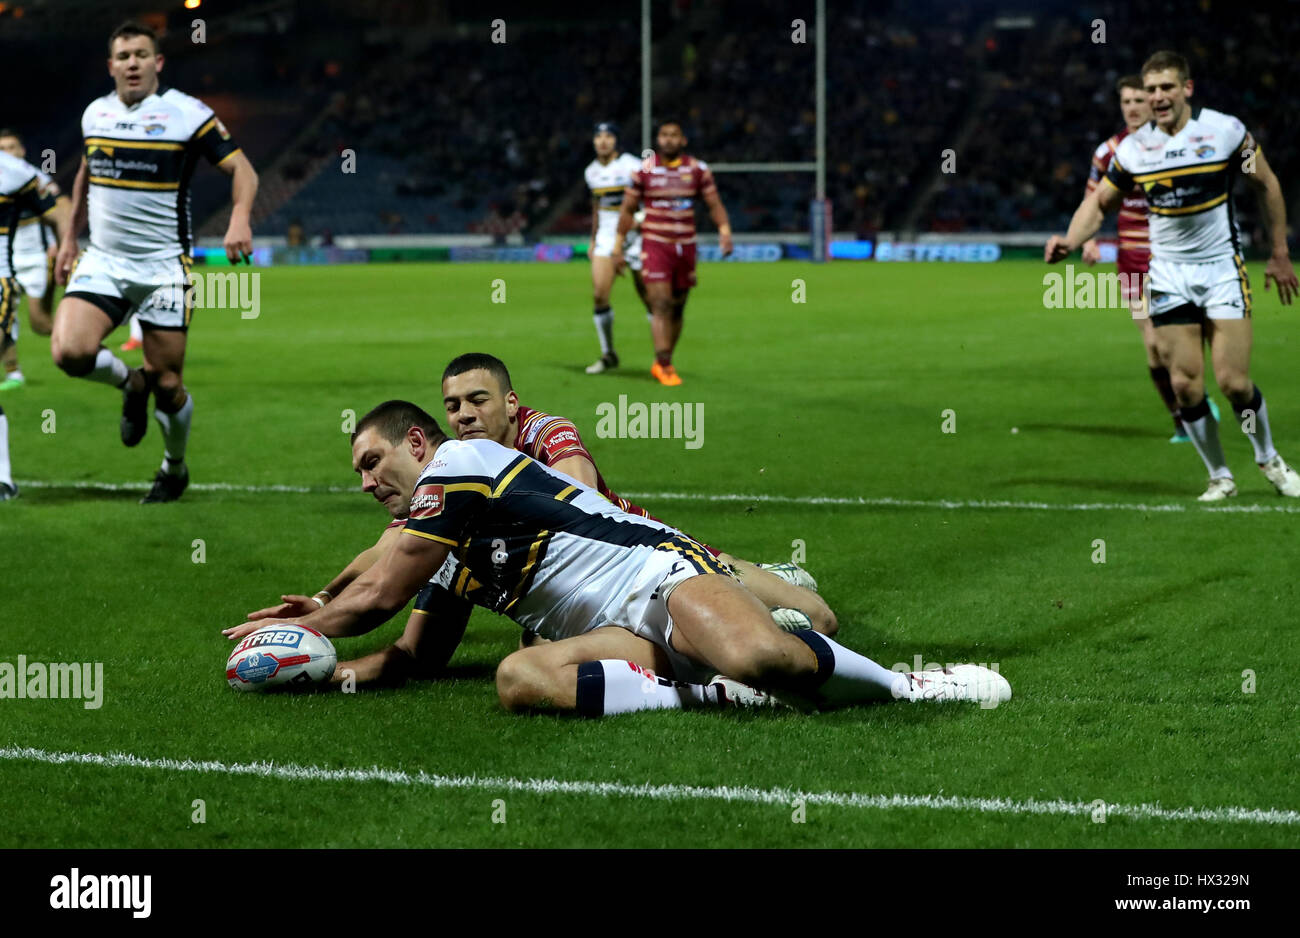 Leeds Rhinos' Ryan Hall dives in to score his side's second try of the game during the Betfred Super League match at the John Smith's Stadium, Huddersfield. Stock Photo